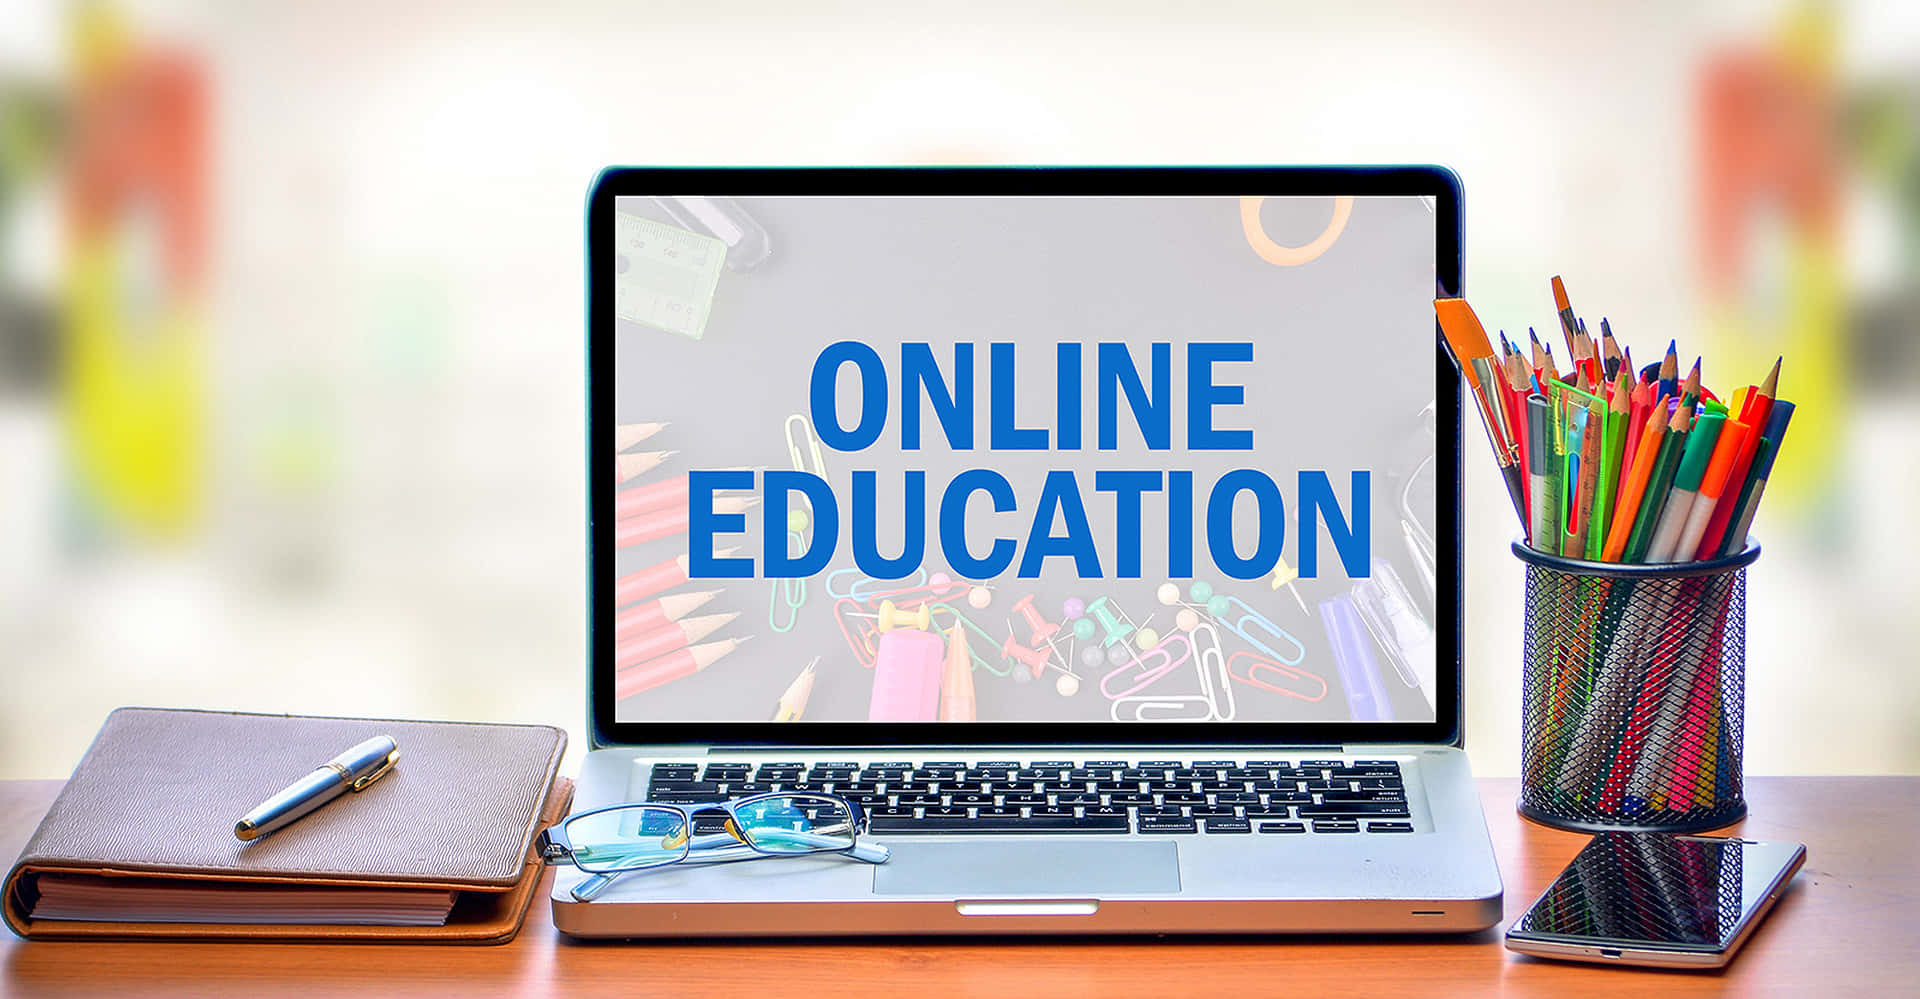 Online Education - A Laptop With The Word Online Education On It